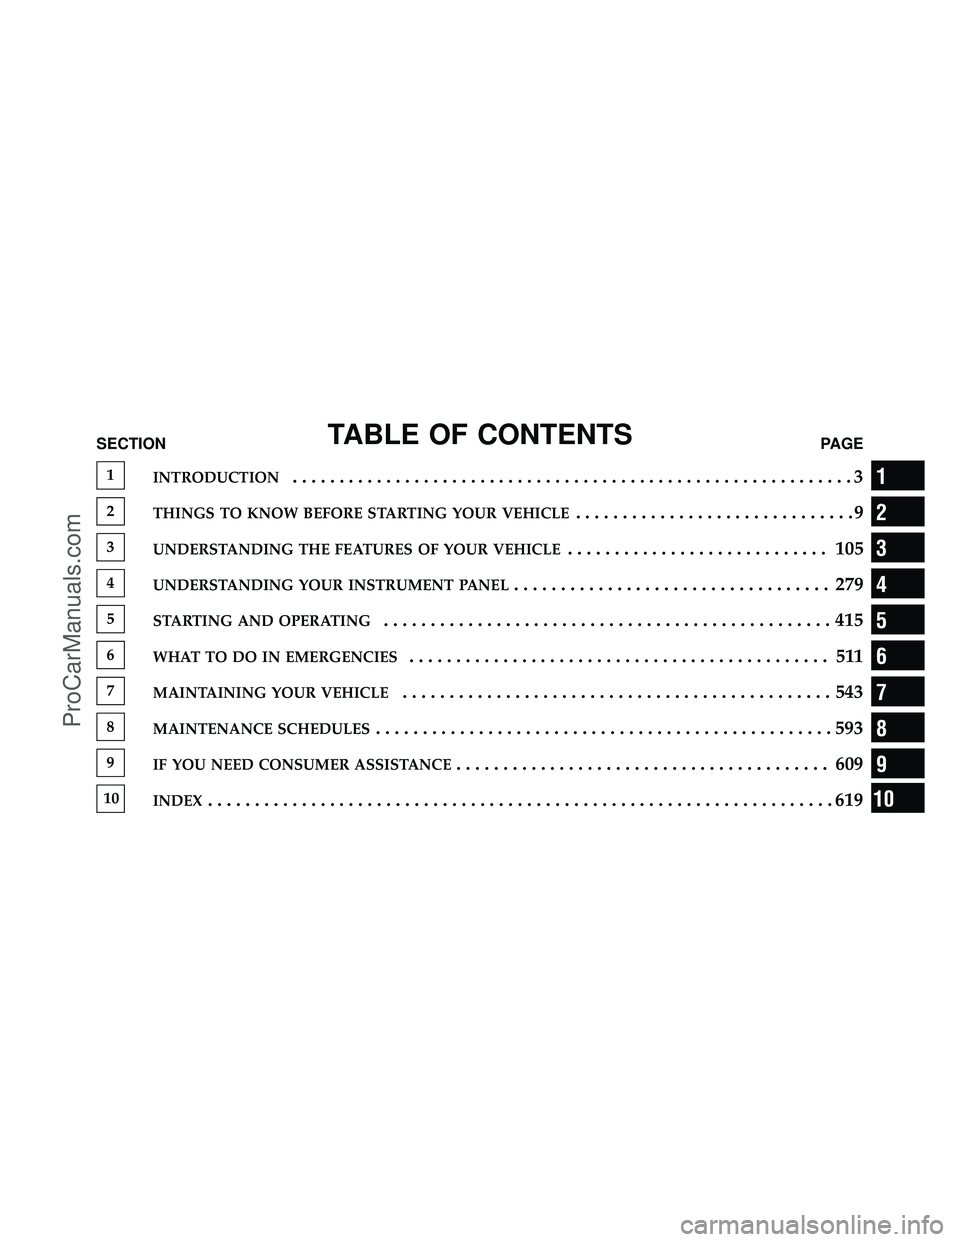 DODGE CARAVAN 2012  Owners Manual TABLE OF CONTENTSSECTIONPAGE
1INTRODUCTION............................................................3
2THINGS TO KNOW BEFORE STARTING YOUR VEHICLE..............................9
3UNDERSTANDING THE F